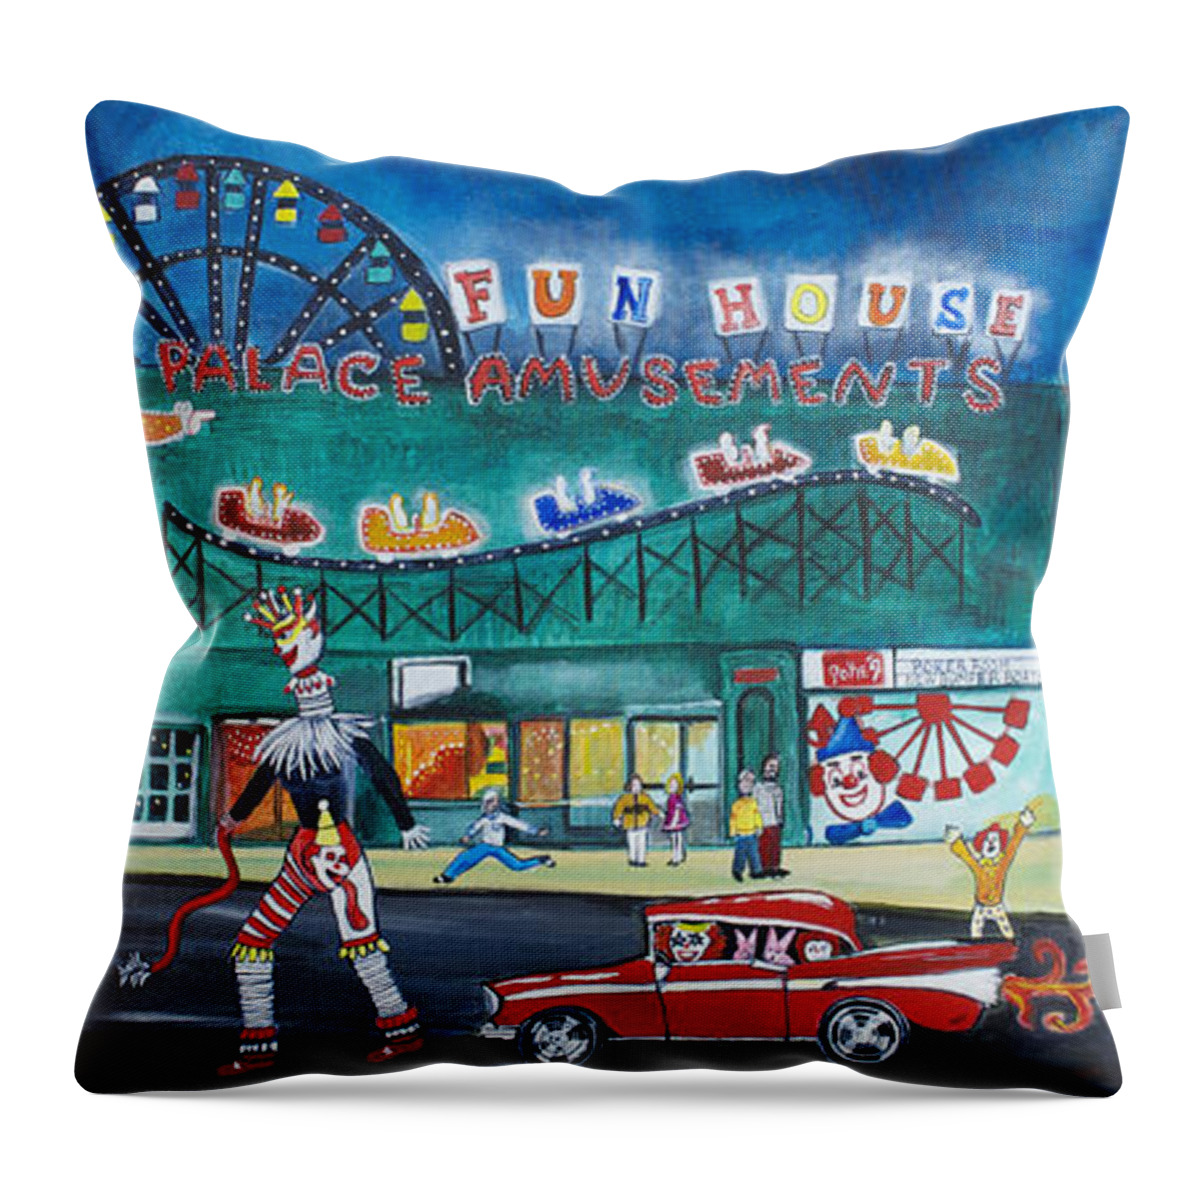 Asbury Park Art Throw Pillow featuring the painting Clown Parade at the Palace by Patricia Arroyo